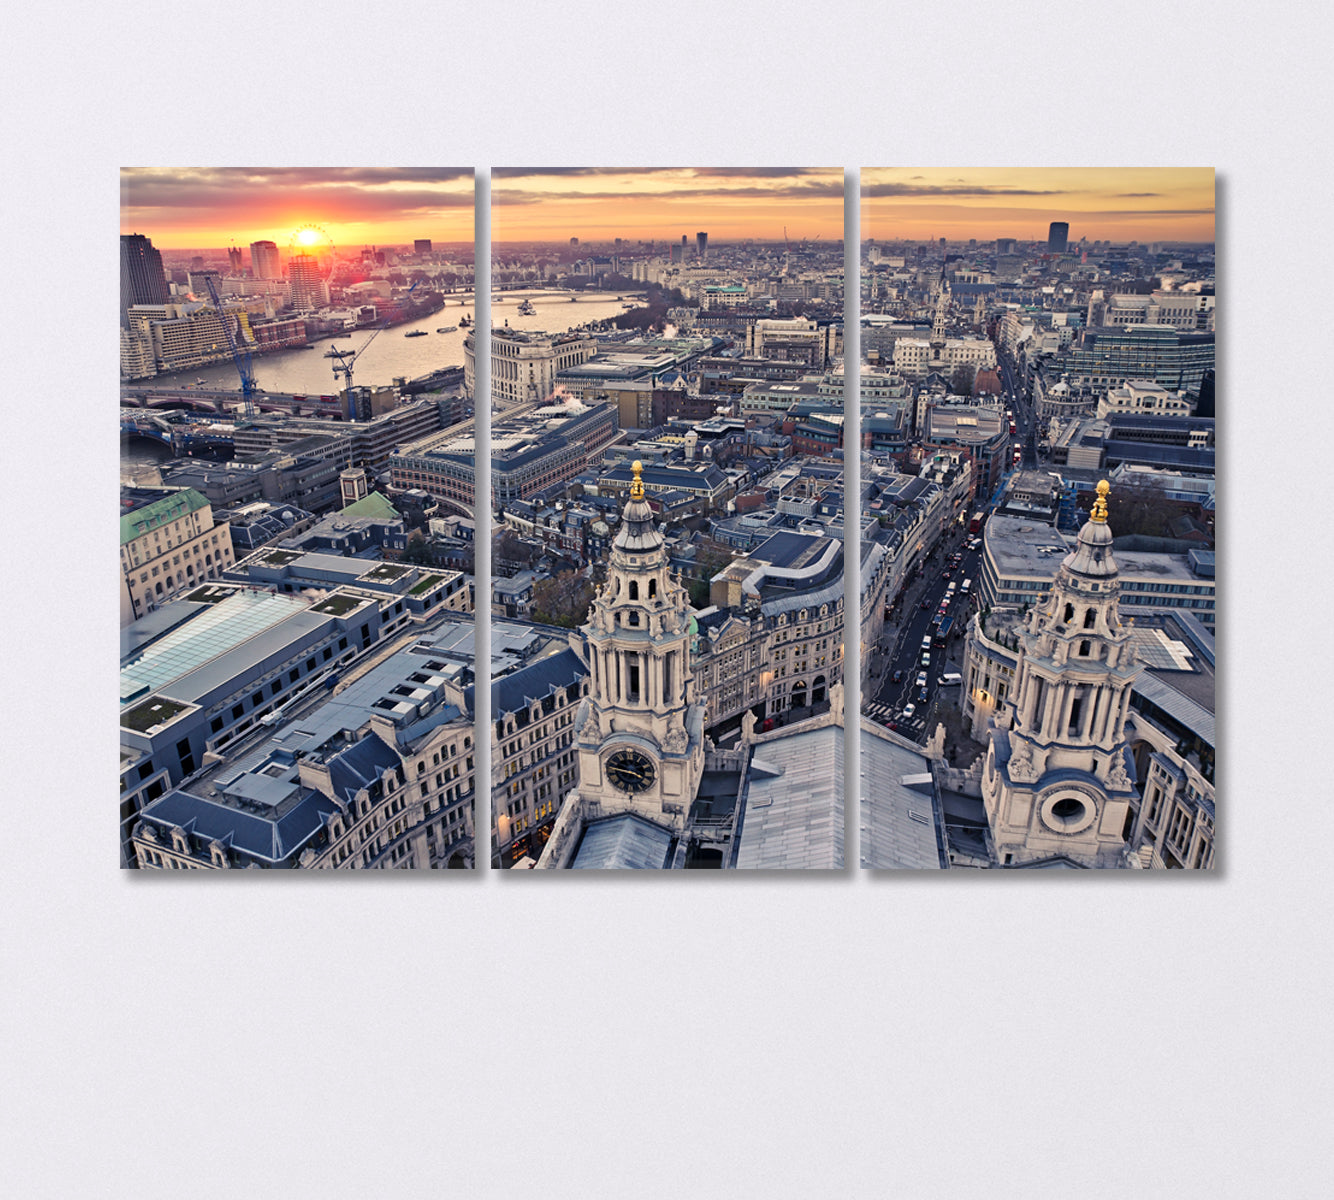 London at Dusk View of St Paul's Cathedral Canvas Print-Canvas Print-CetArt-3 Panels-36x24 inches-CetArt